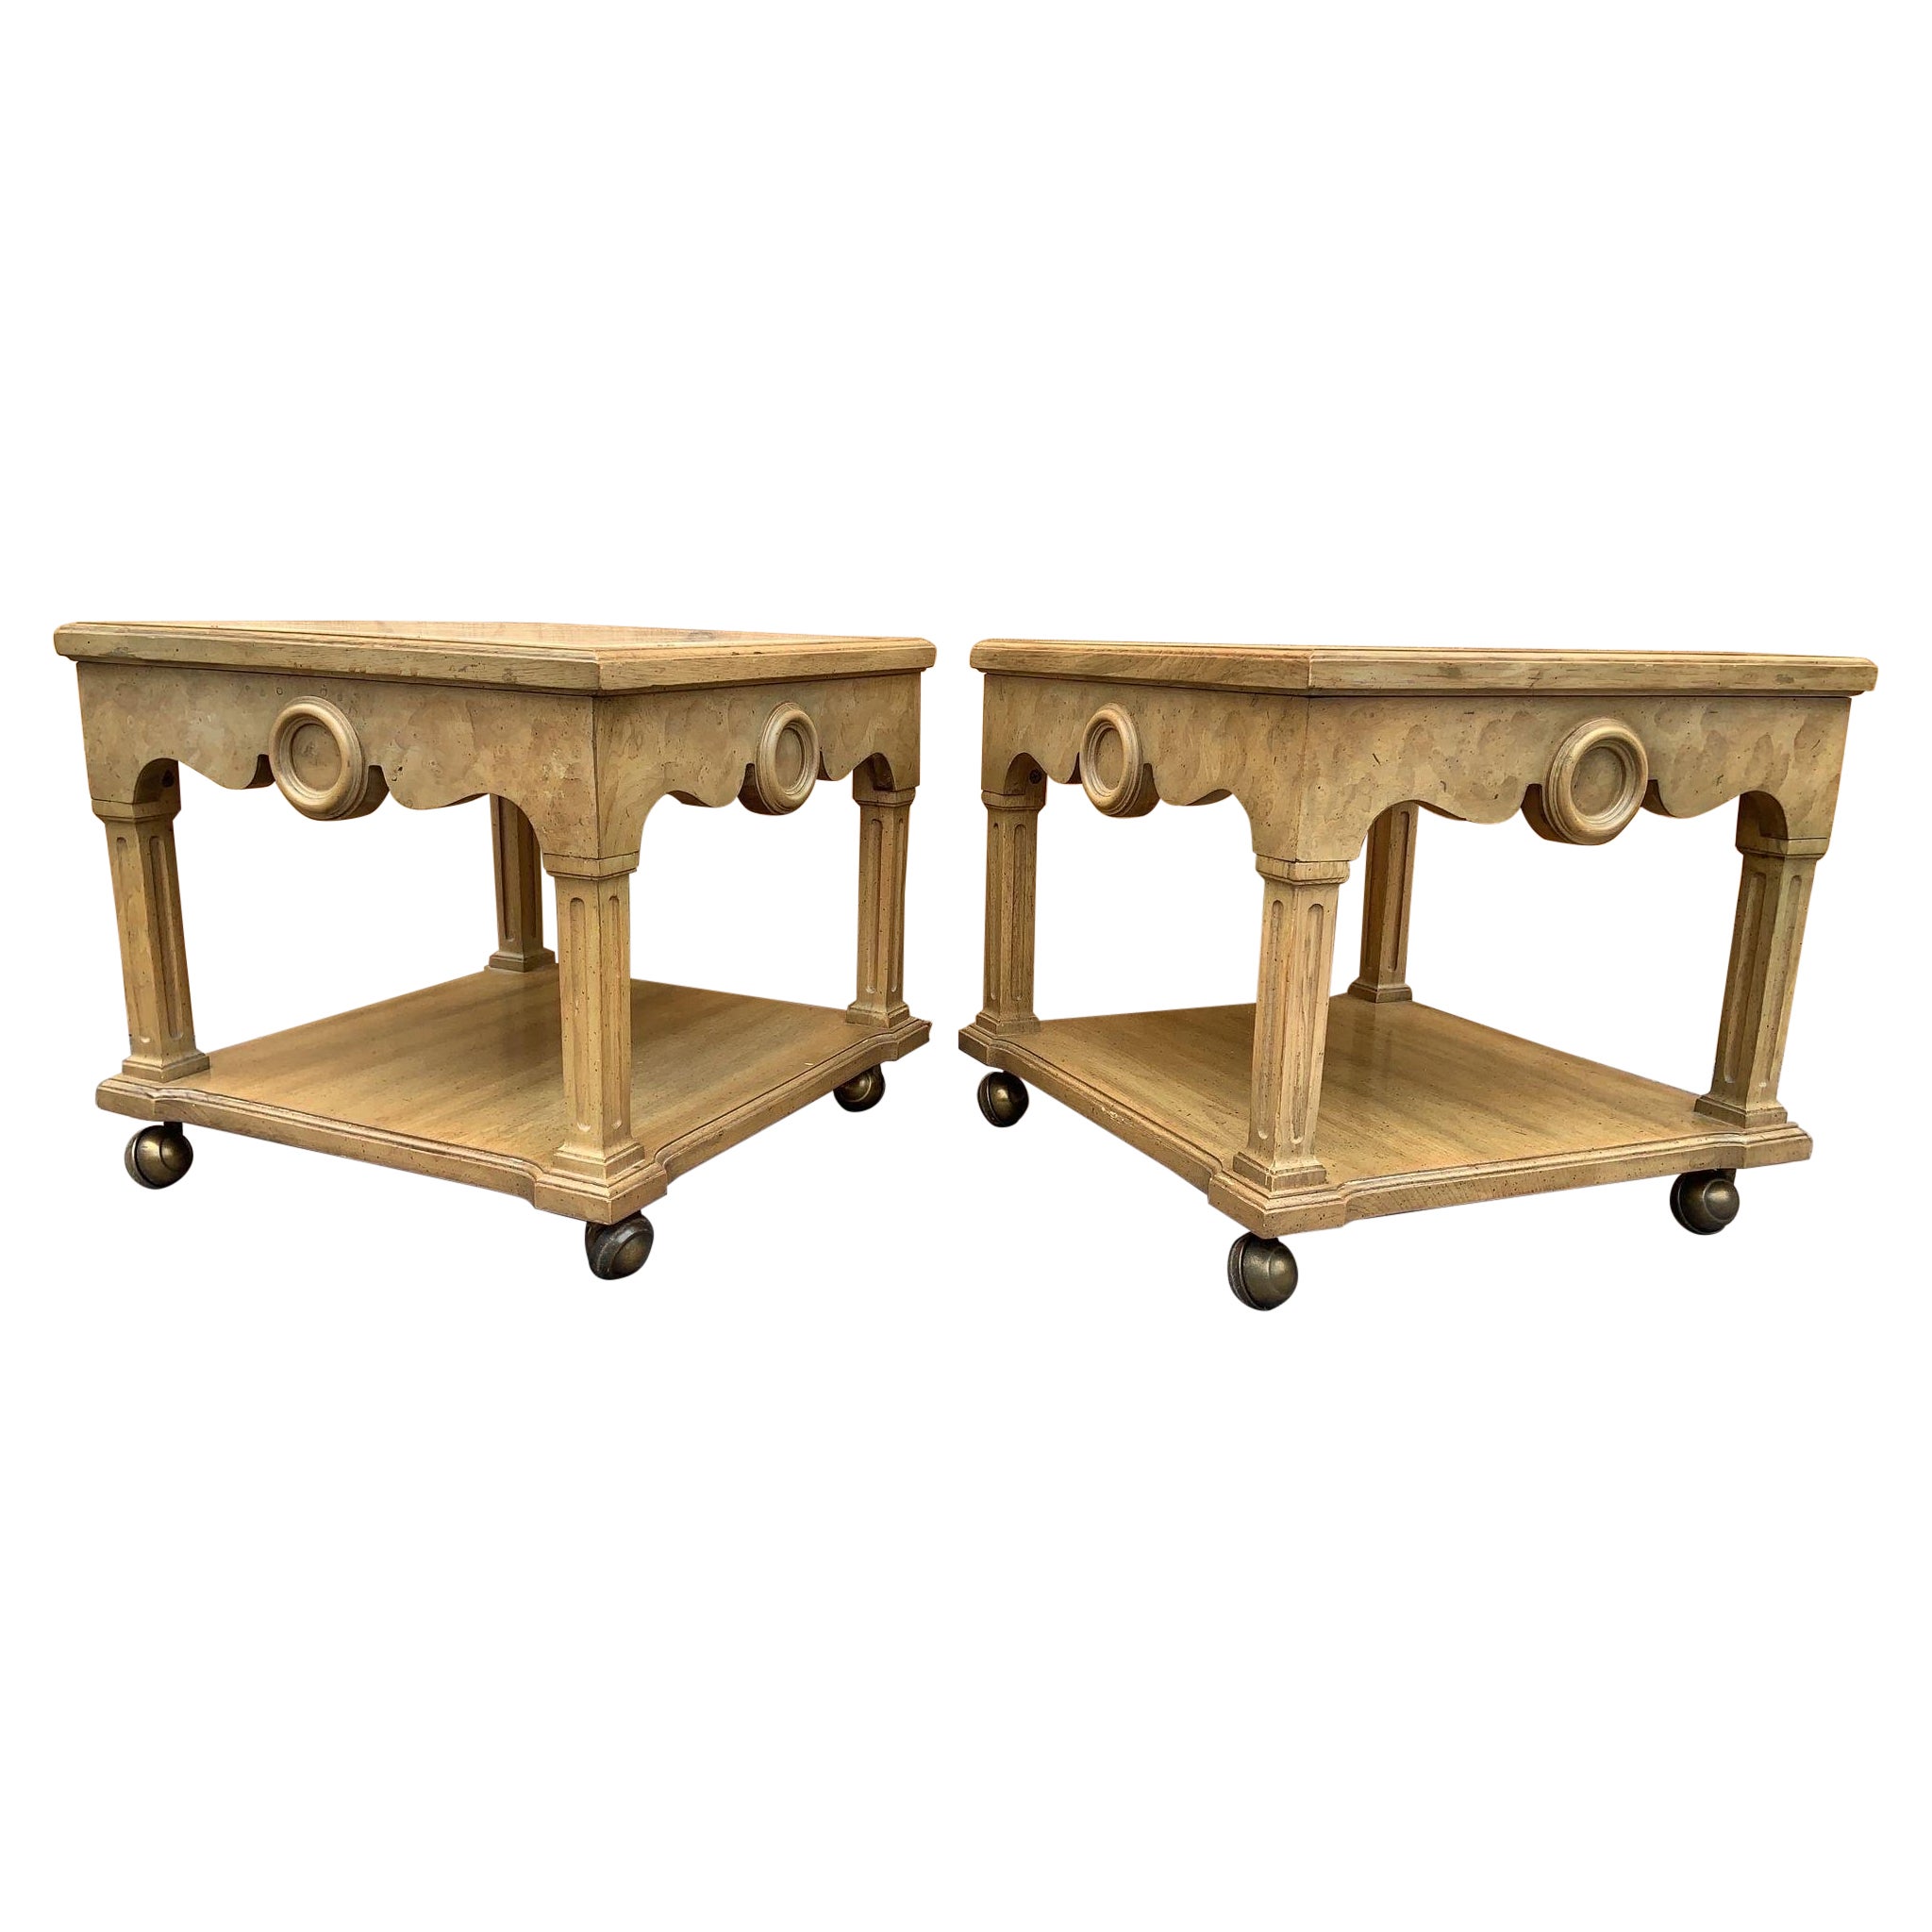 Vintage Italian Neoclassical Style Pickled Wood End Tables w/ Travertine Tops For Sale